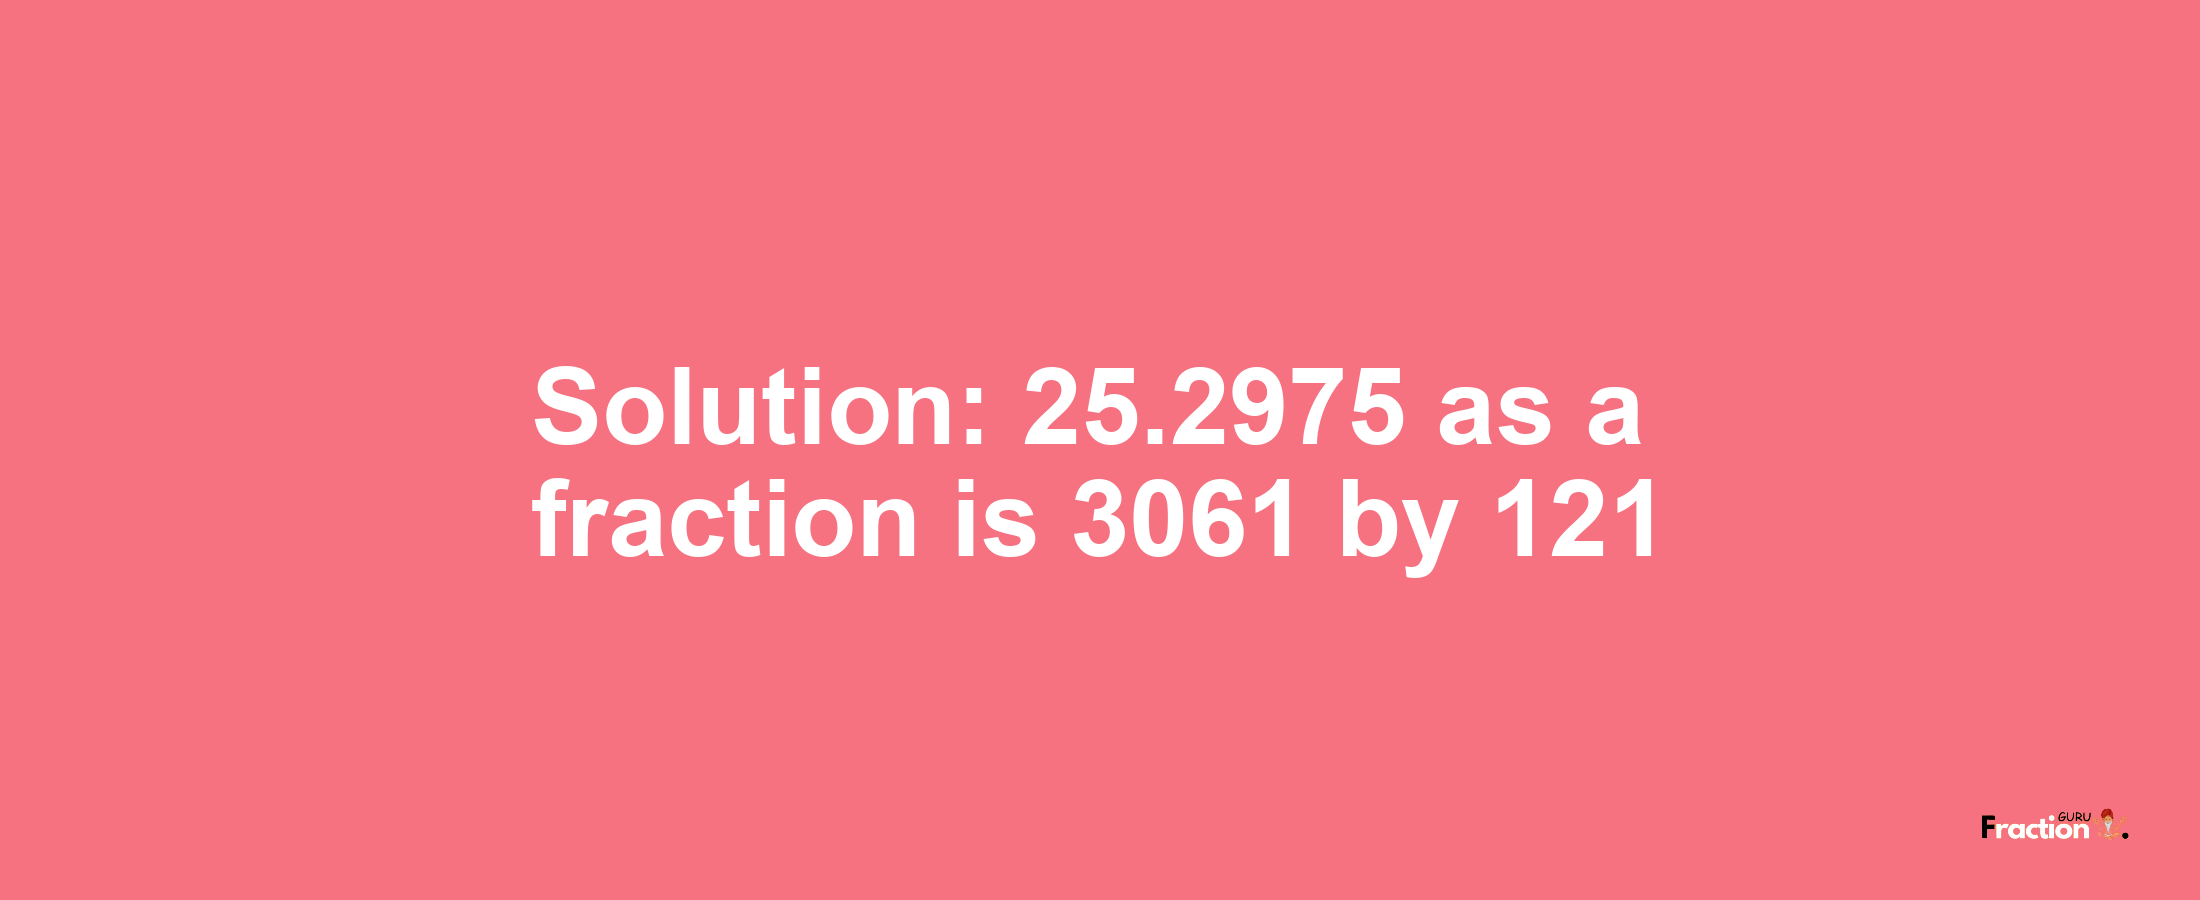 Solution:25.2975 as a fraction is 3061/121